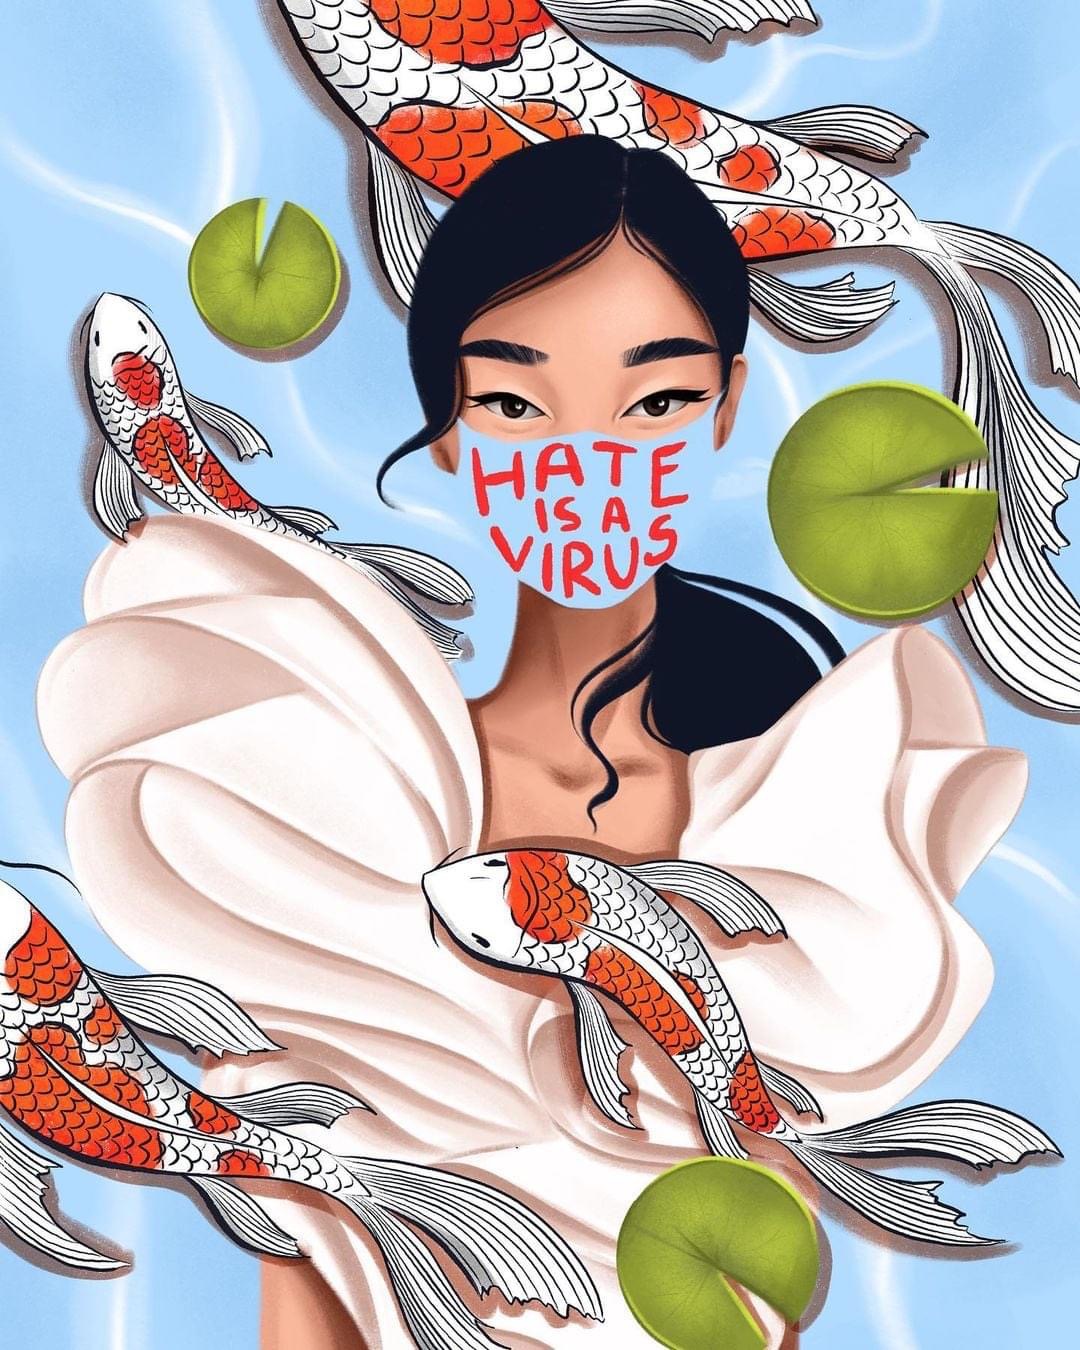 An Open Letter to Asian Hate